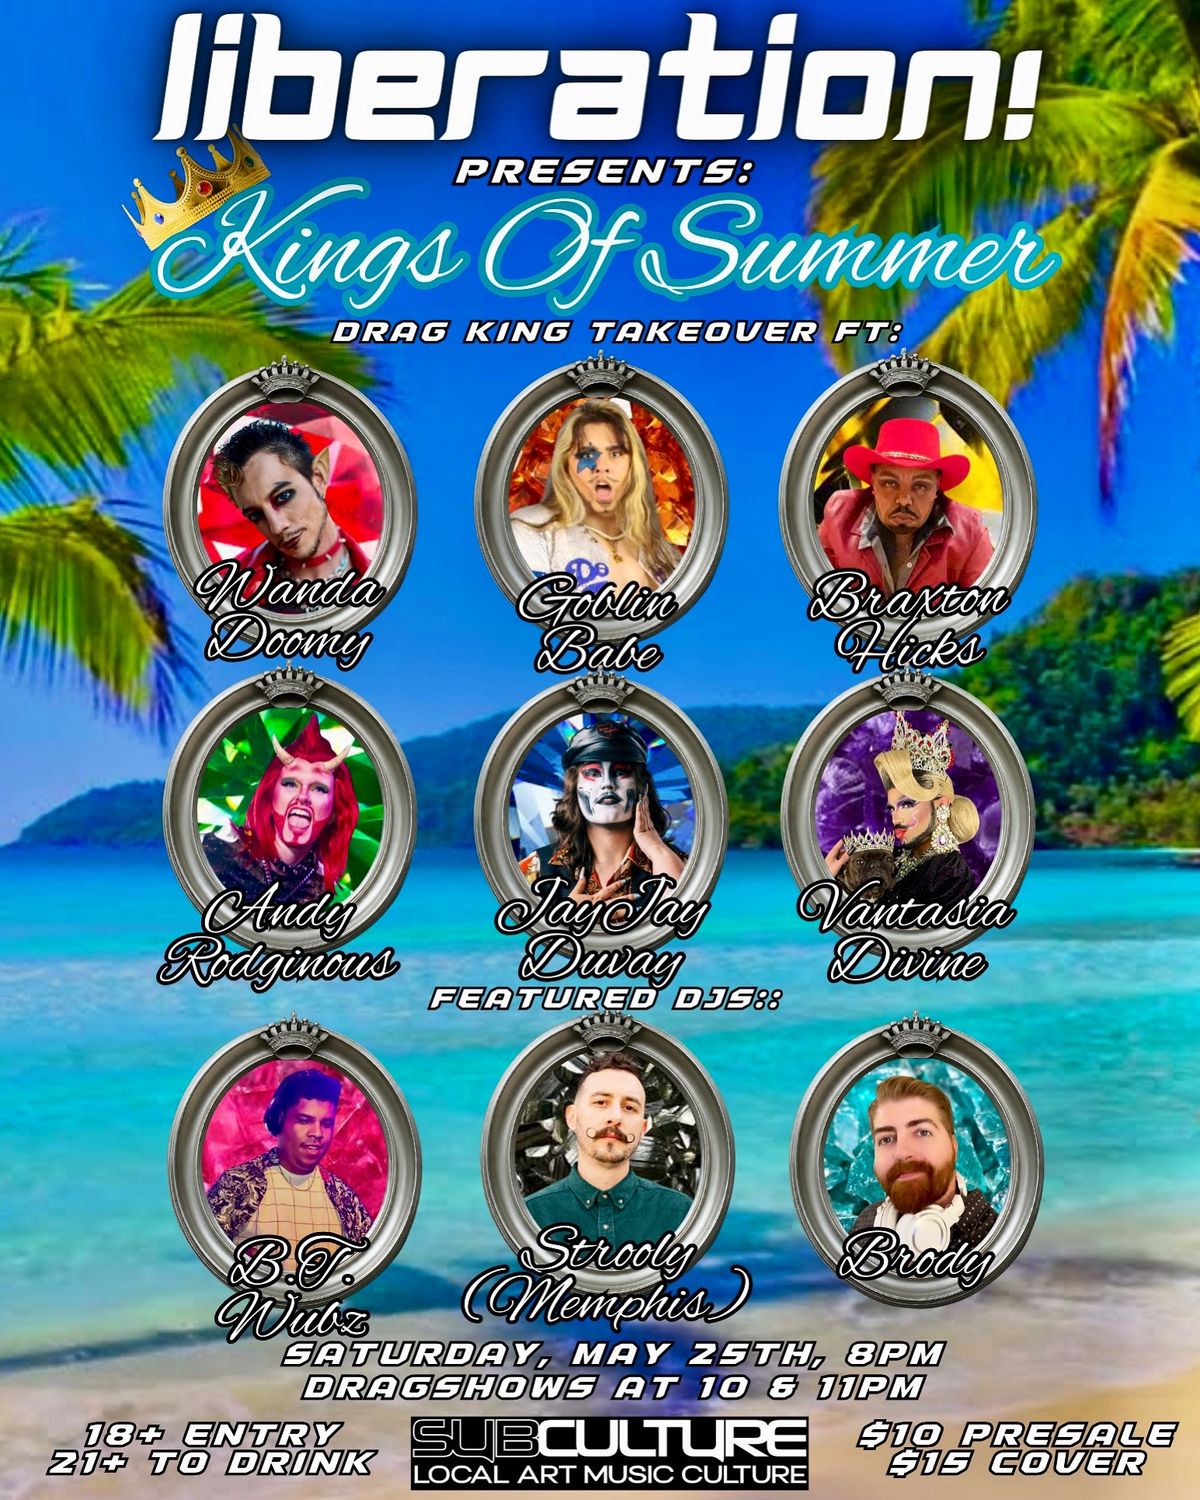 Liberation! Presents: Kings Of Summer